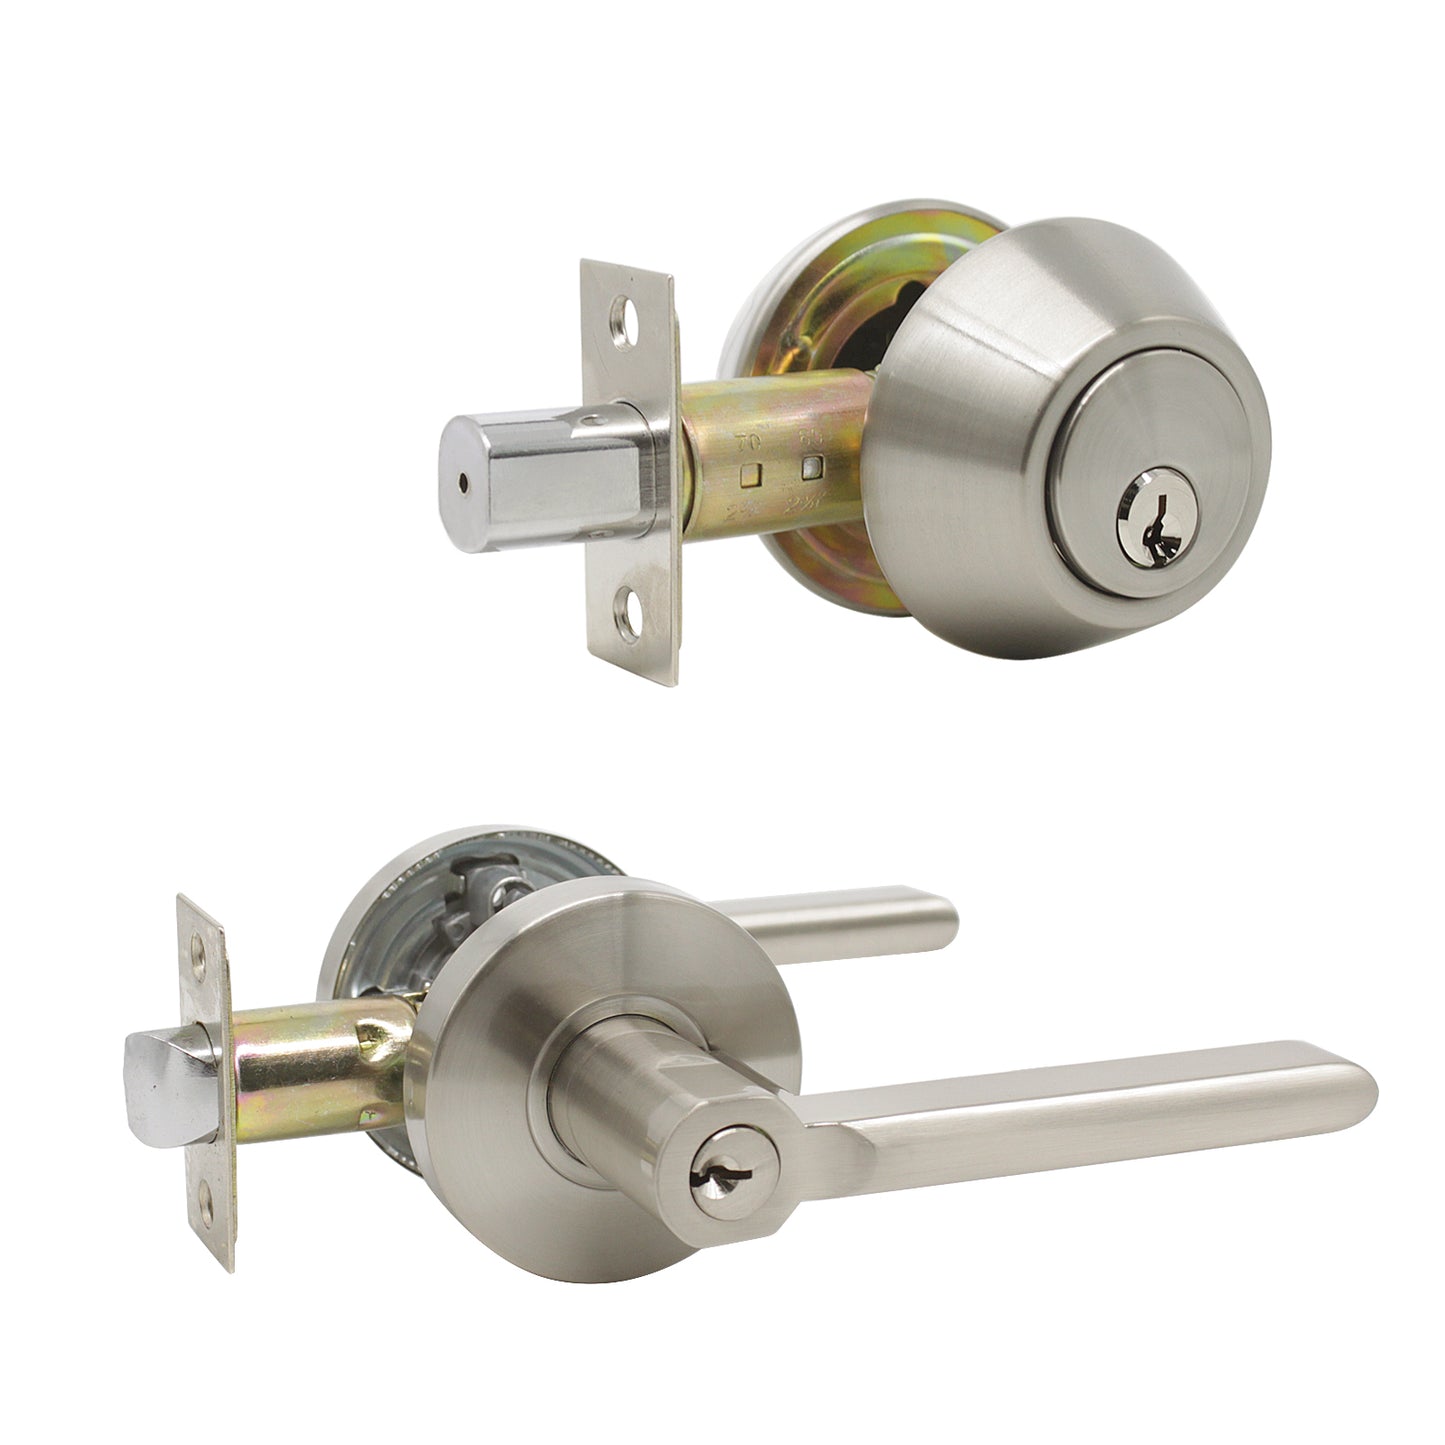 Keyed Entry Door Lever Lock and Double Cylinder Deadbolts Combo Pack (Keyed Alike), Satin Nickel Finish DL1637ET-102SN - Probrico